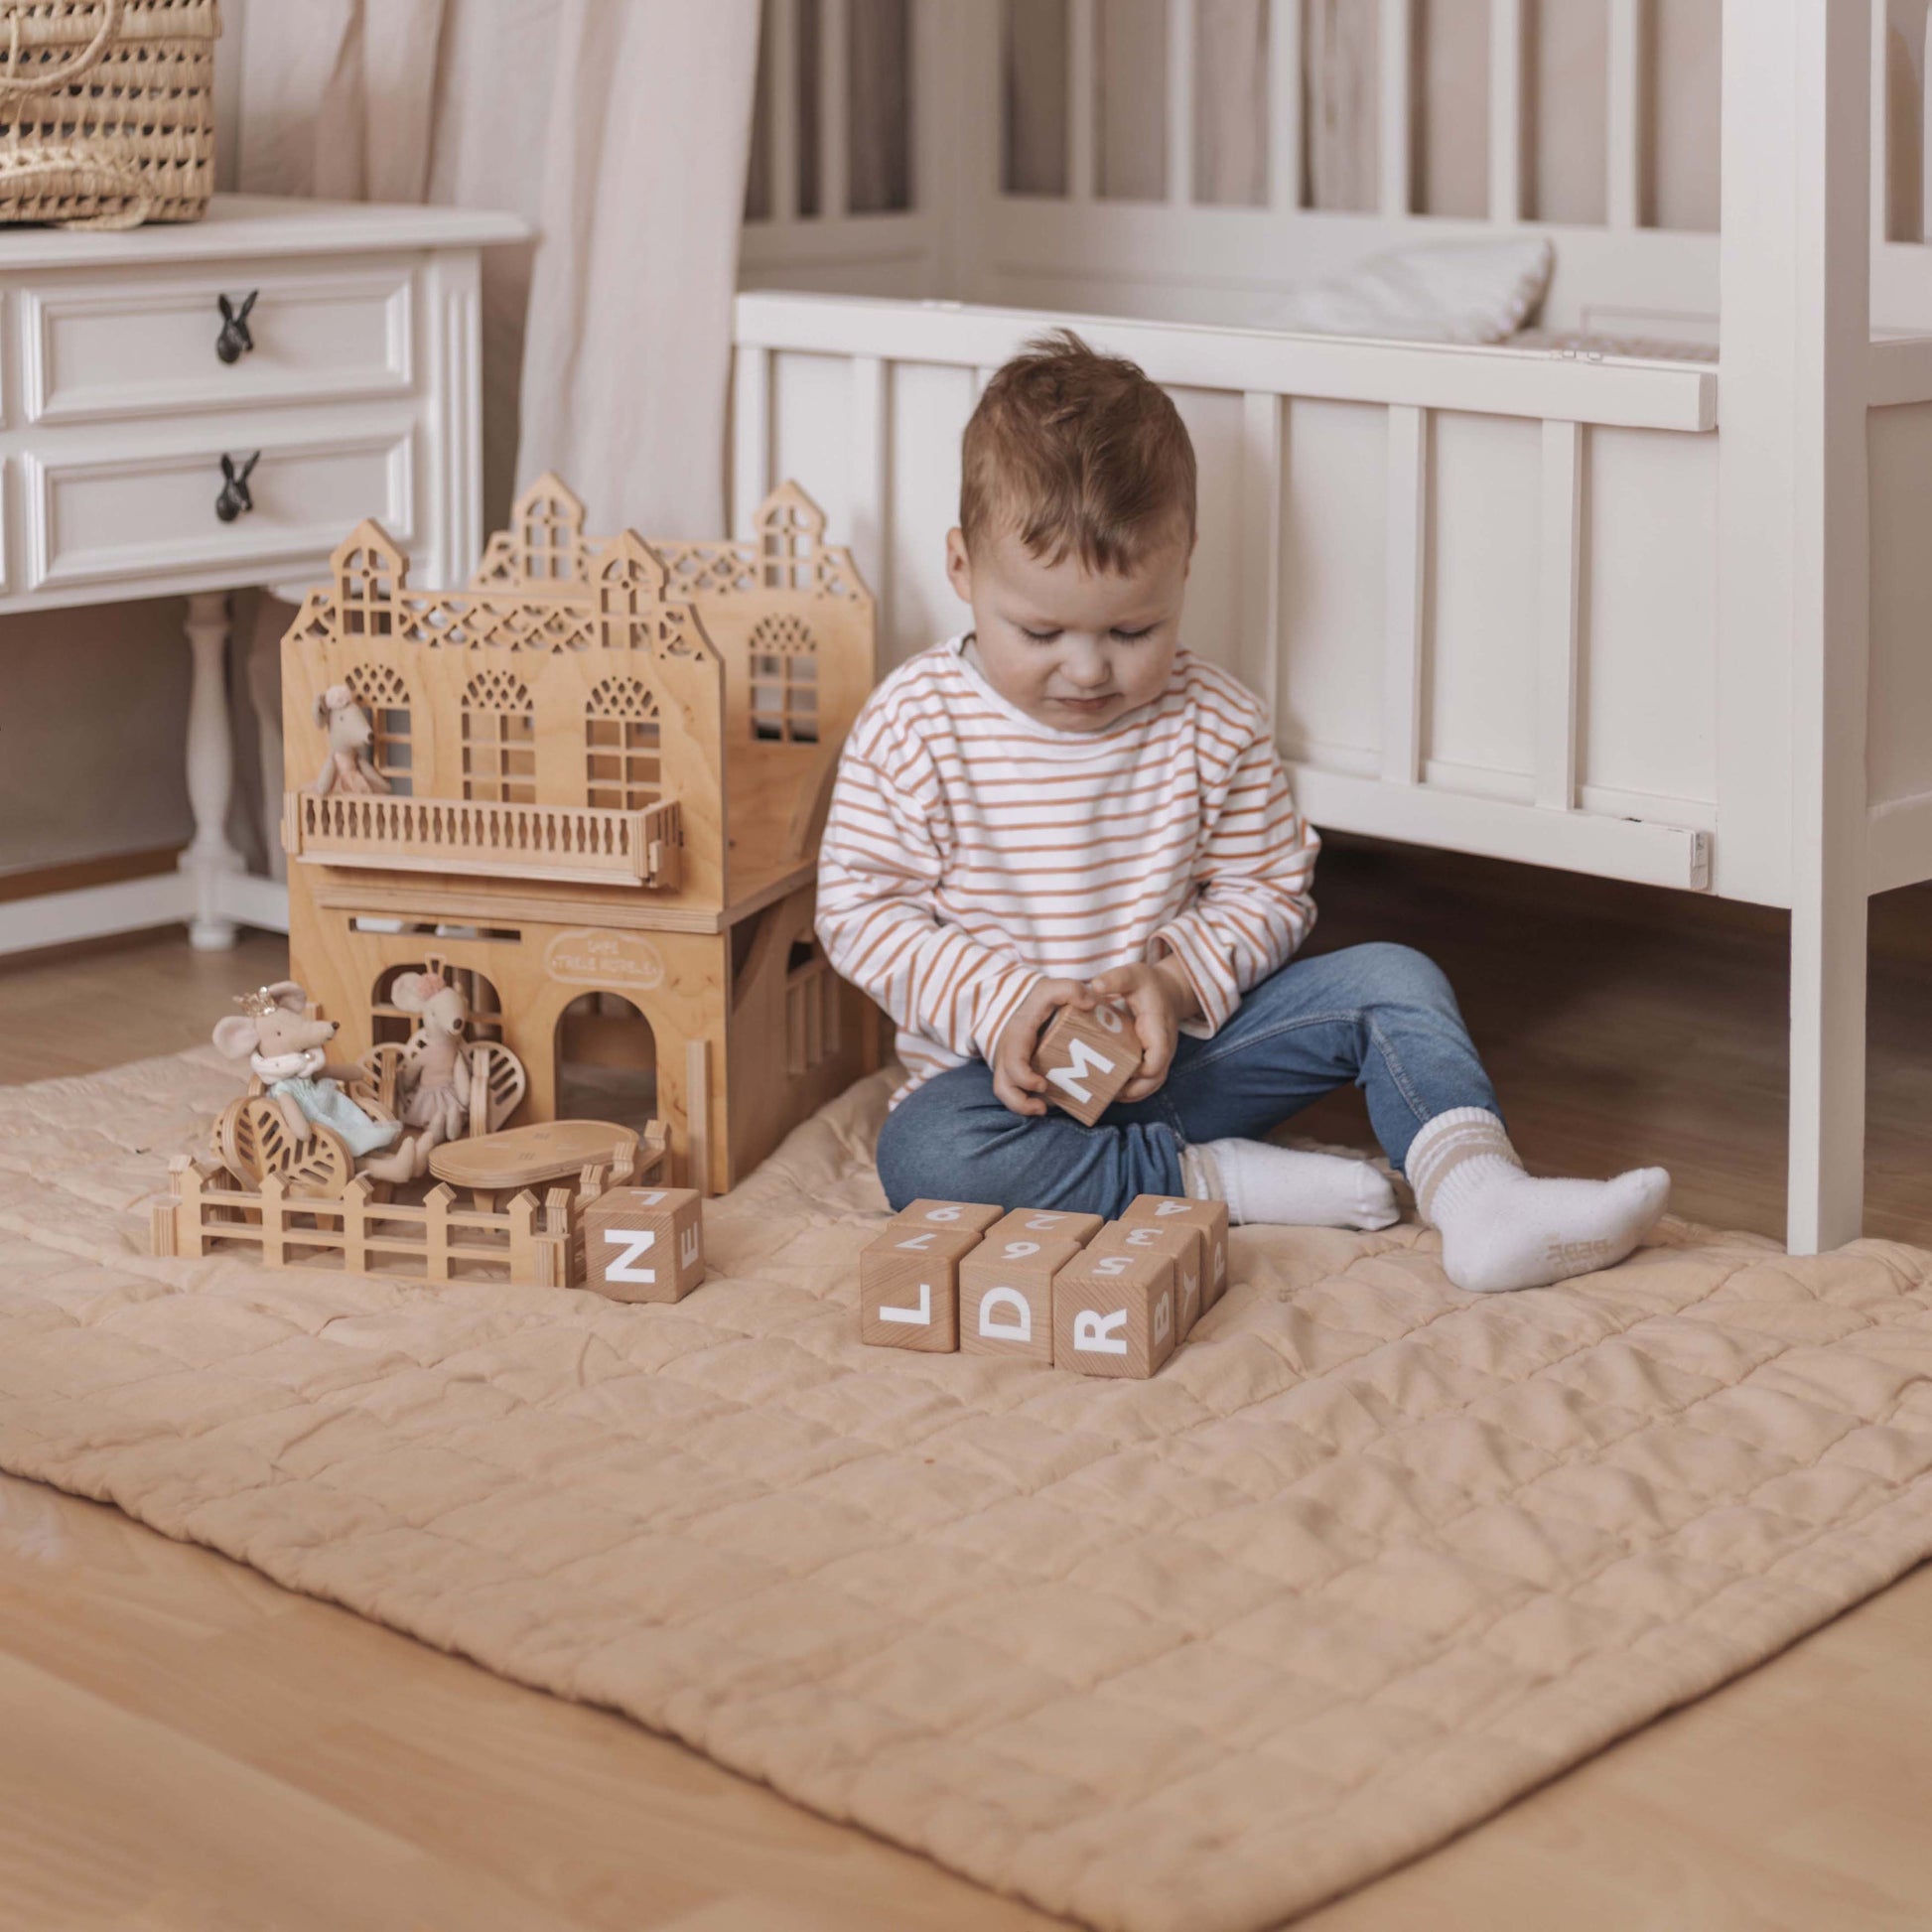 Anna can be used as a play mat so that your child can have fun comfortably in his room or outdoors.